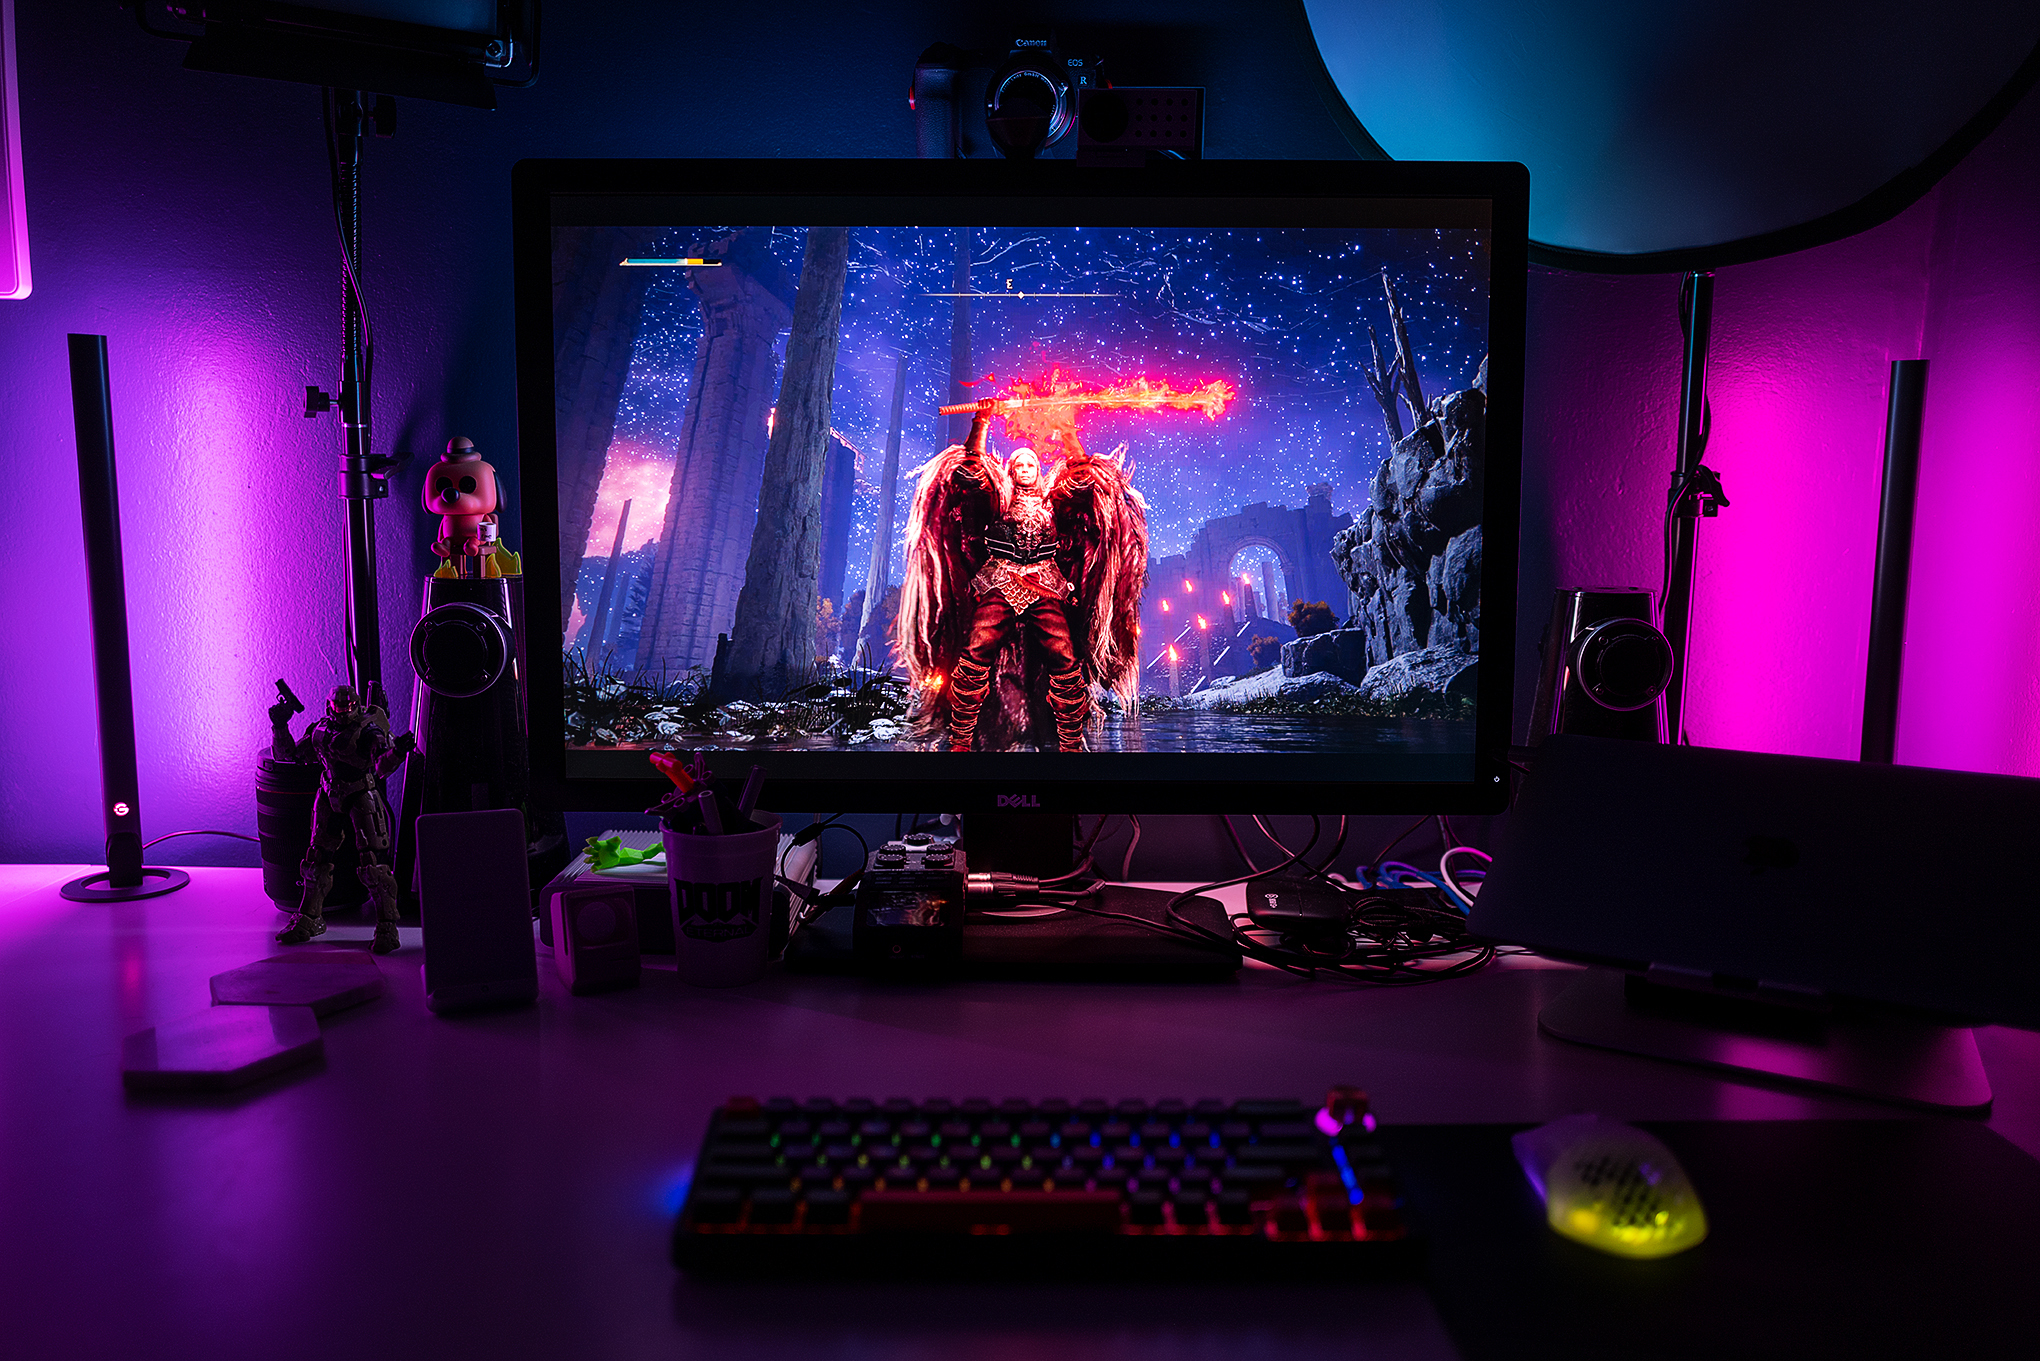 The three-point RGBIC lighting setup of the Govee DreamView G1 Pro, set up on a monitor on a desk.